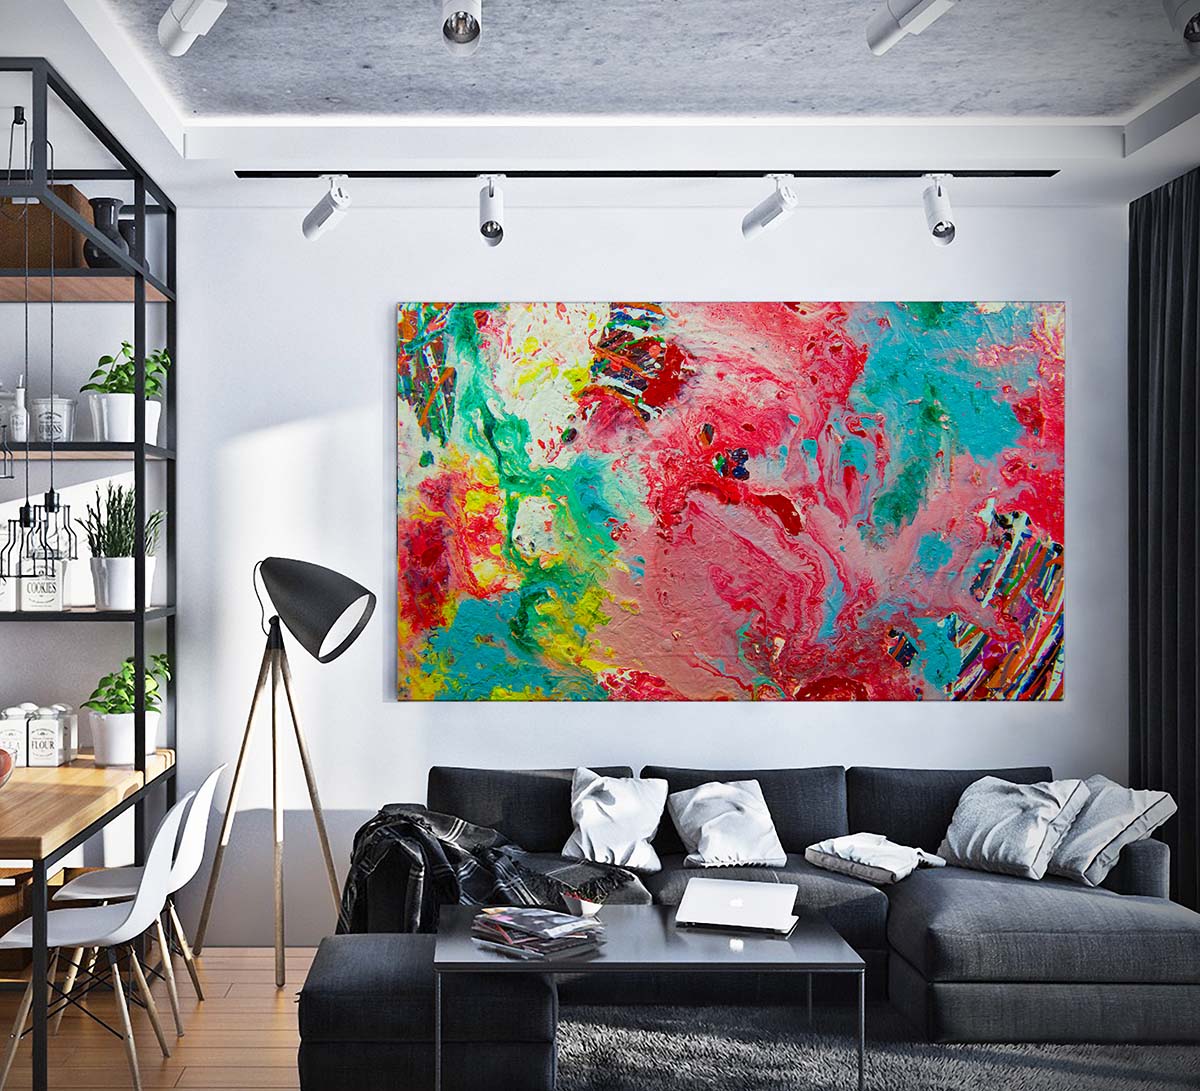 Abstract 21 Slurry art by Doug LaRue large print in an apartment